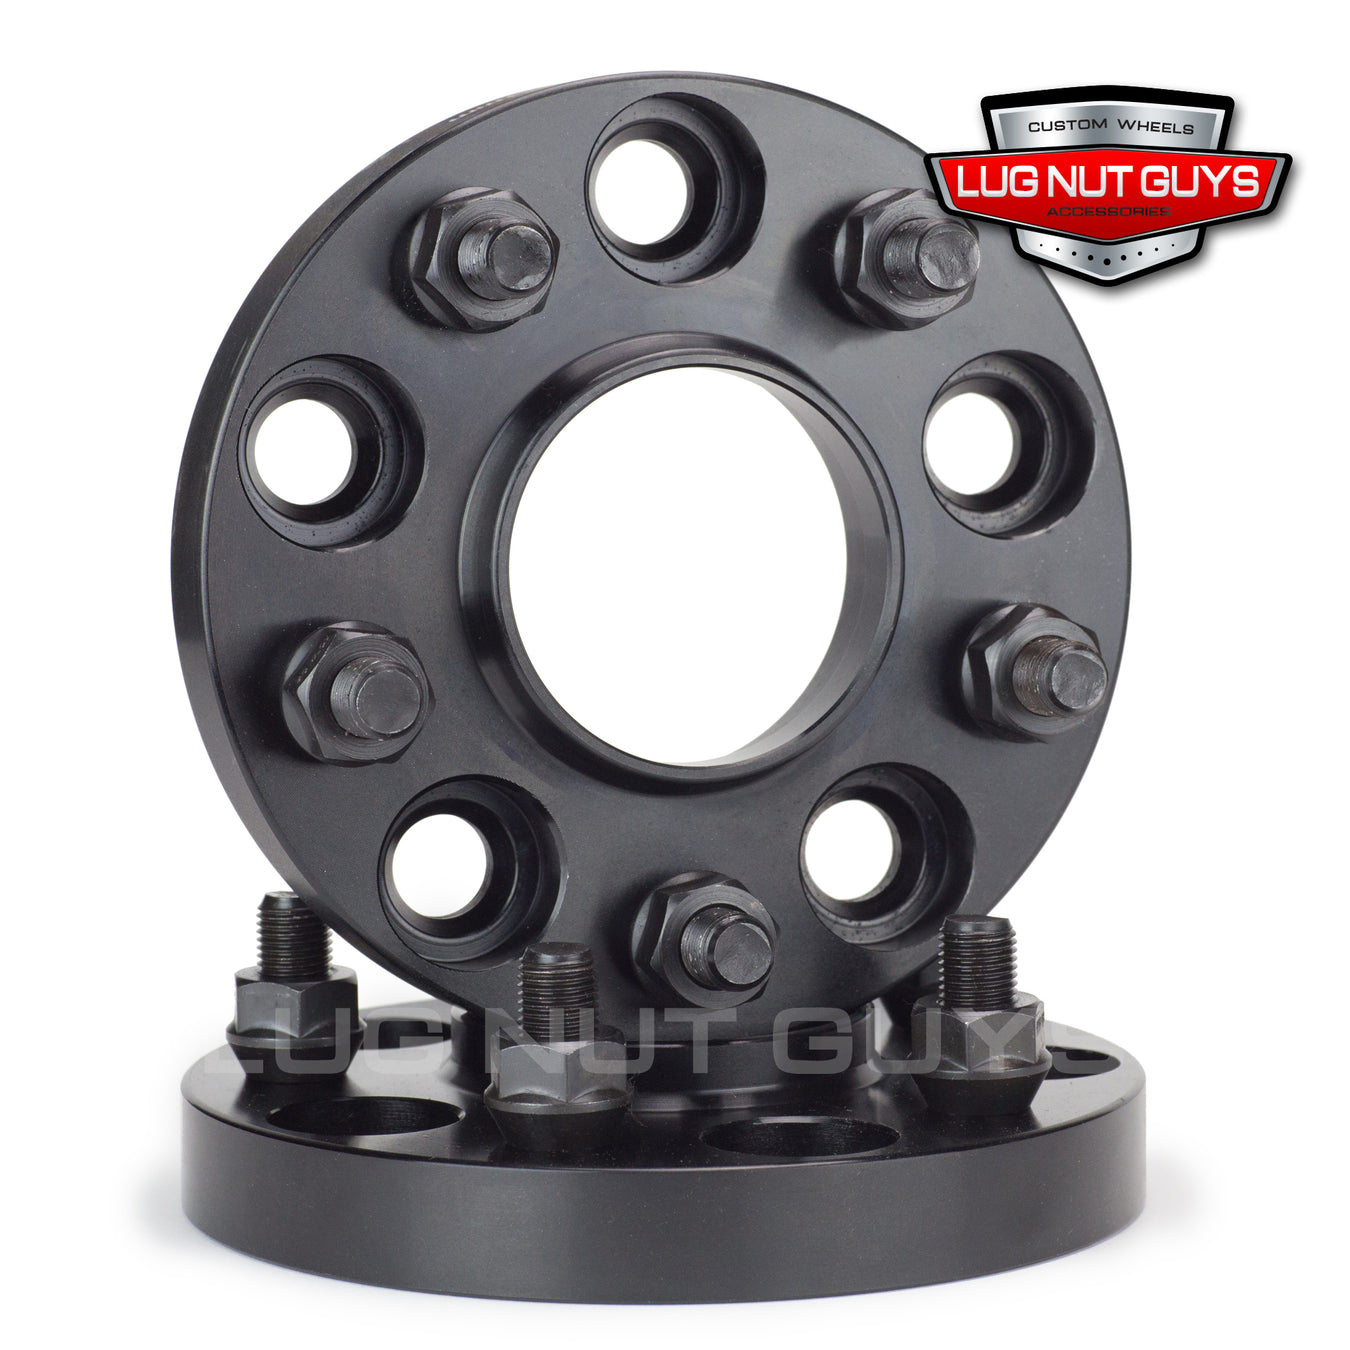 Wheel Adapters - 5x100 to 5x4.5